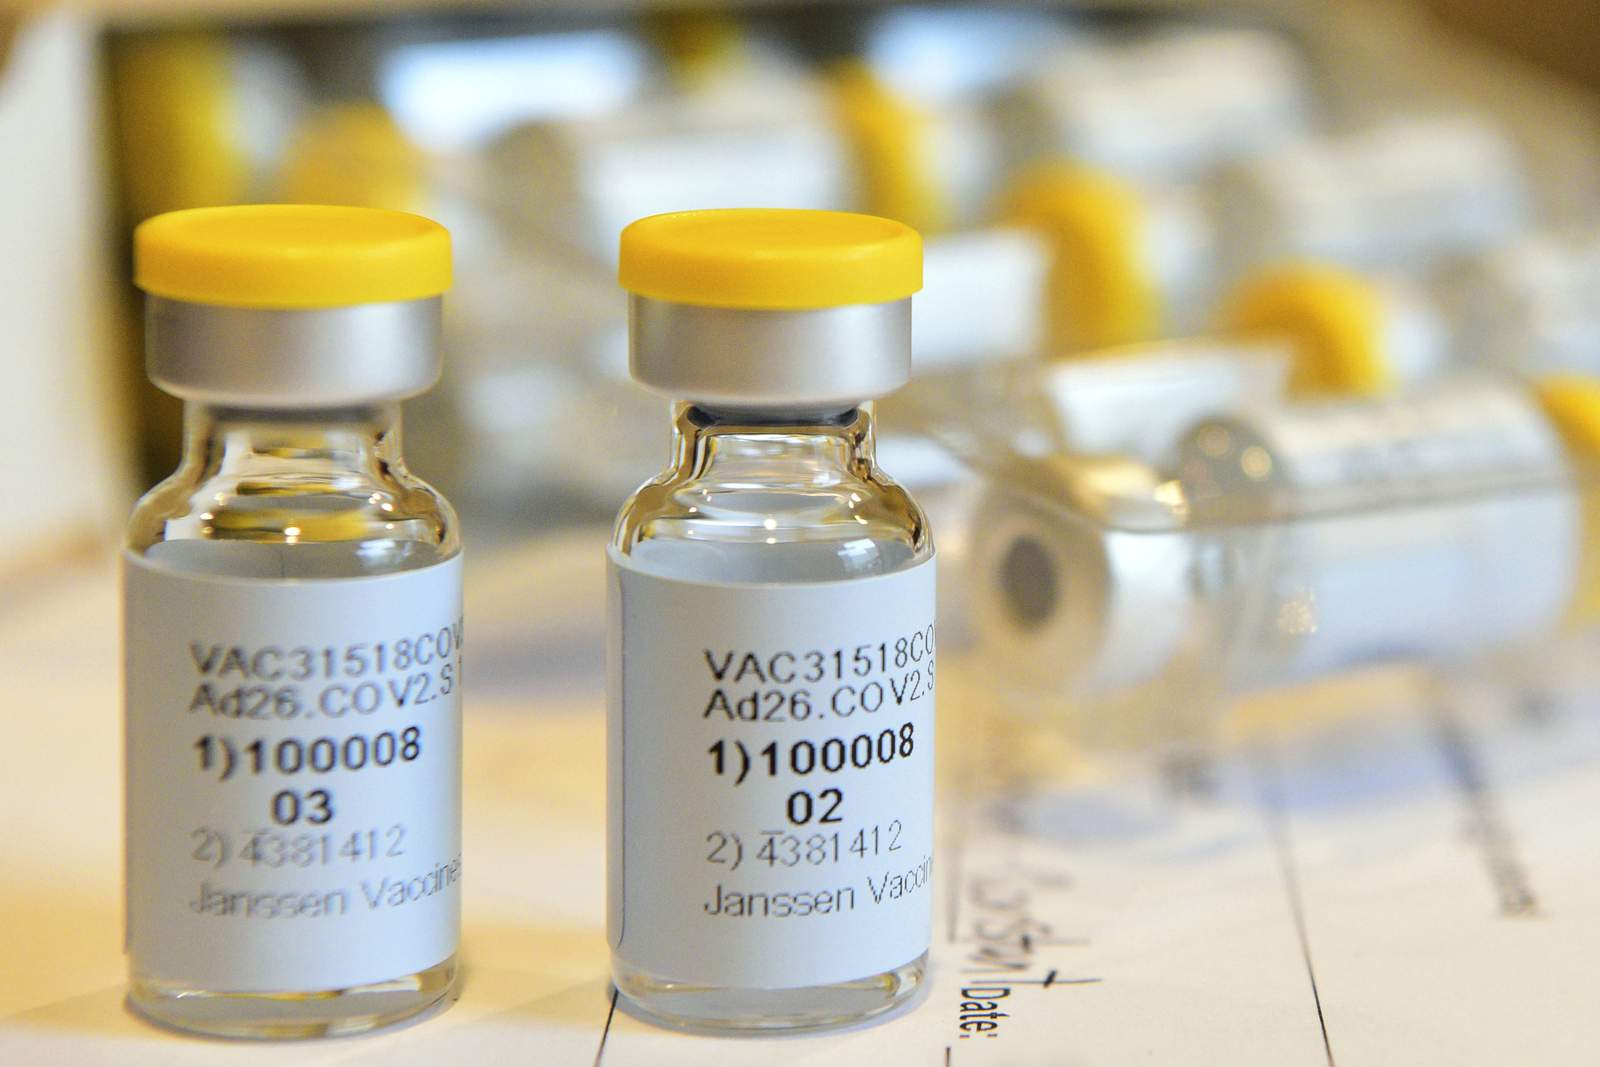 Henry Ford to carry out phase 3 of COVID-19 vaccine trial in Metro Detroit